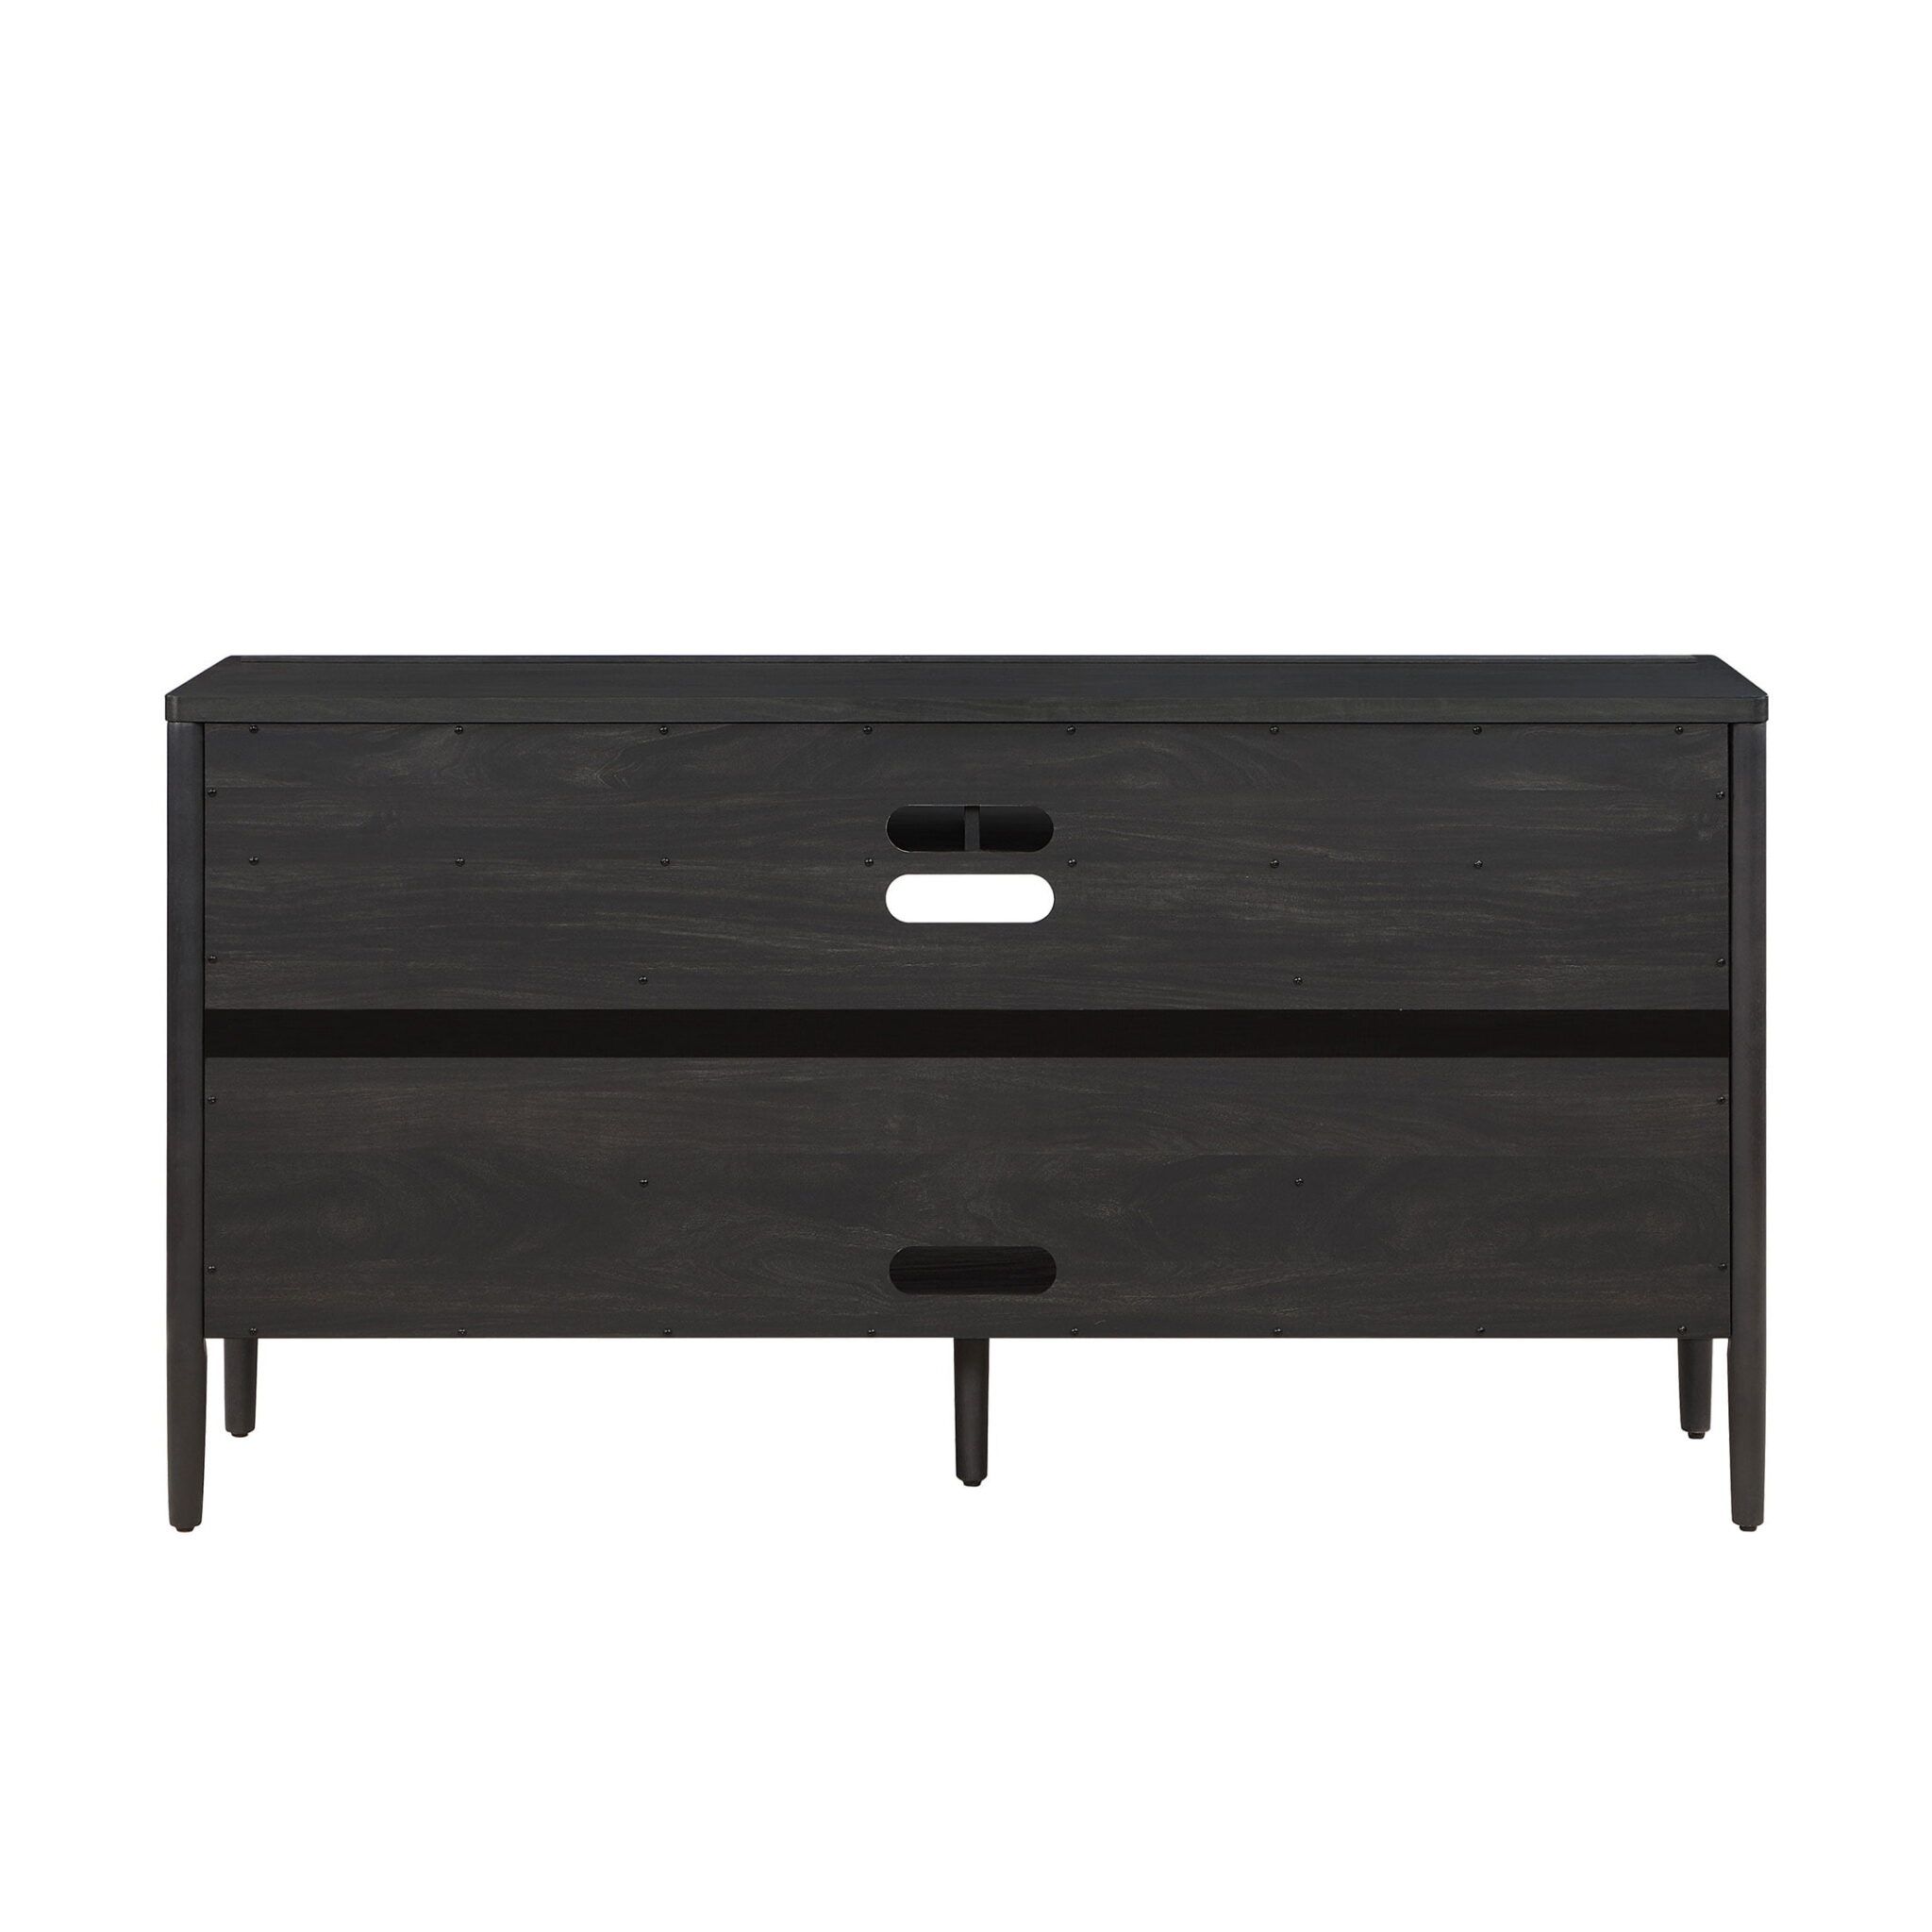 Better Homes & Gardens Oaklee Tv Stand For Tvs Up To 70”, Charcoal With Regard To Oaklee Tv Stands (View 20 of 20)